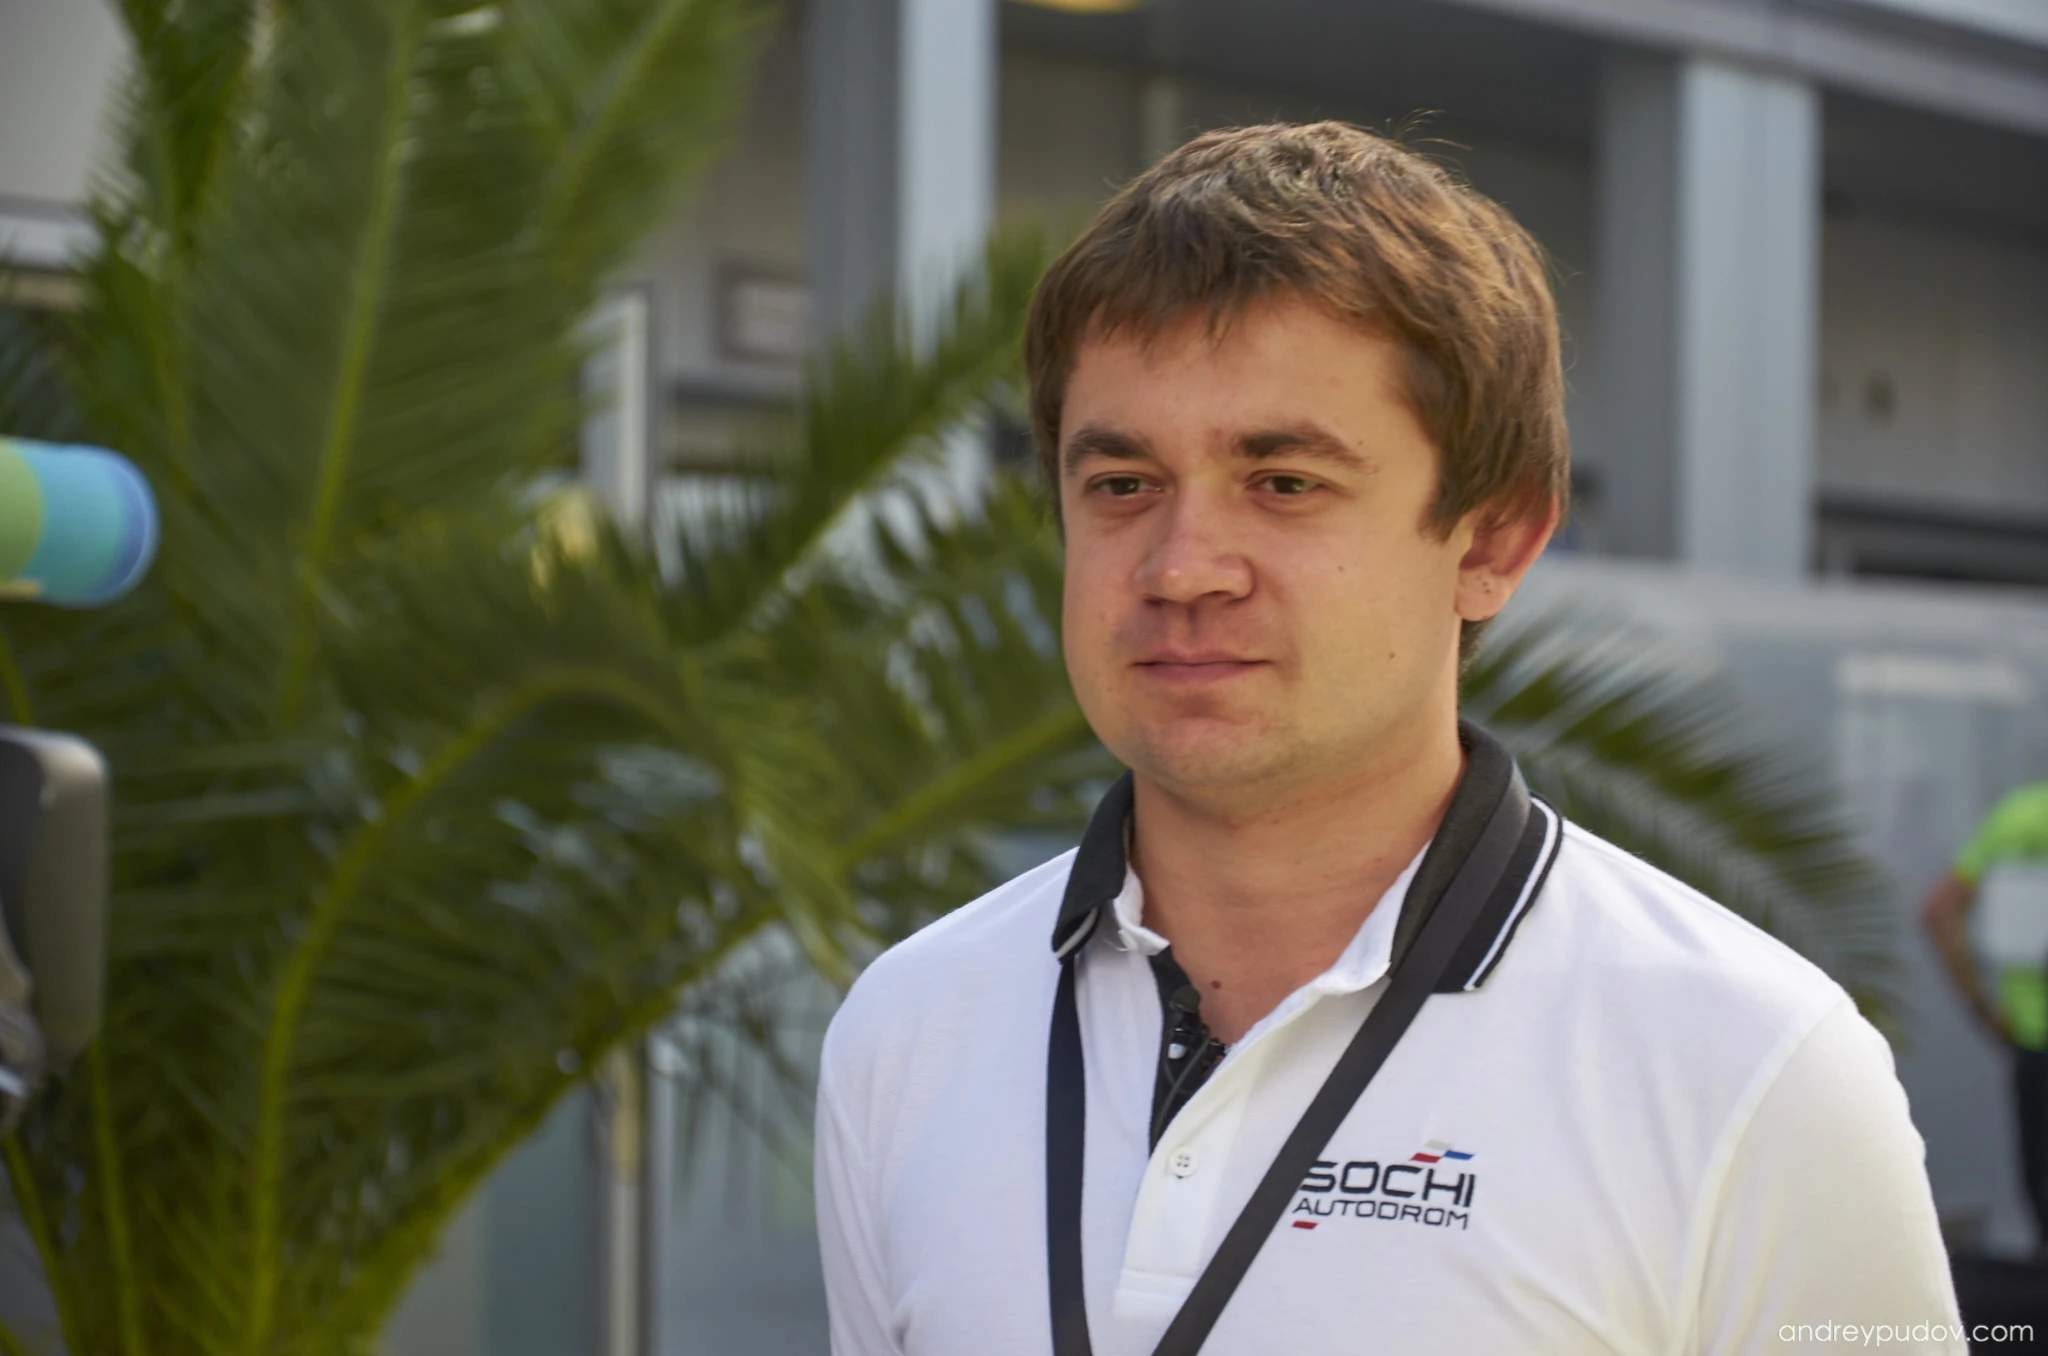 2015 Formula 1 Russian Grand Prix - Sergey Vorobyev is the Russian Grand Prix promoter and Chief Executive Officer of Rosgonki.